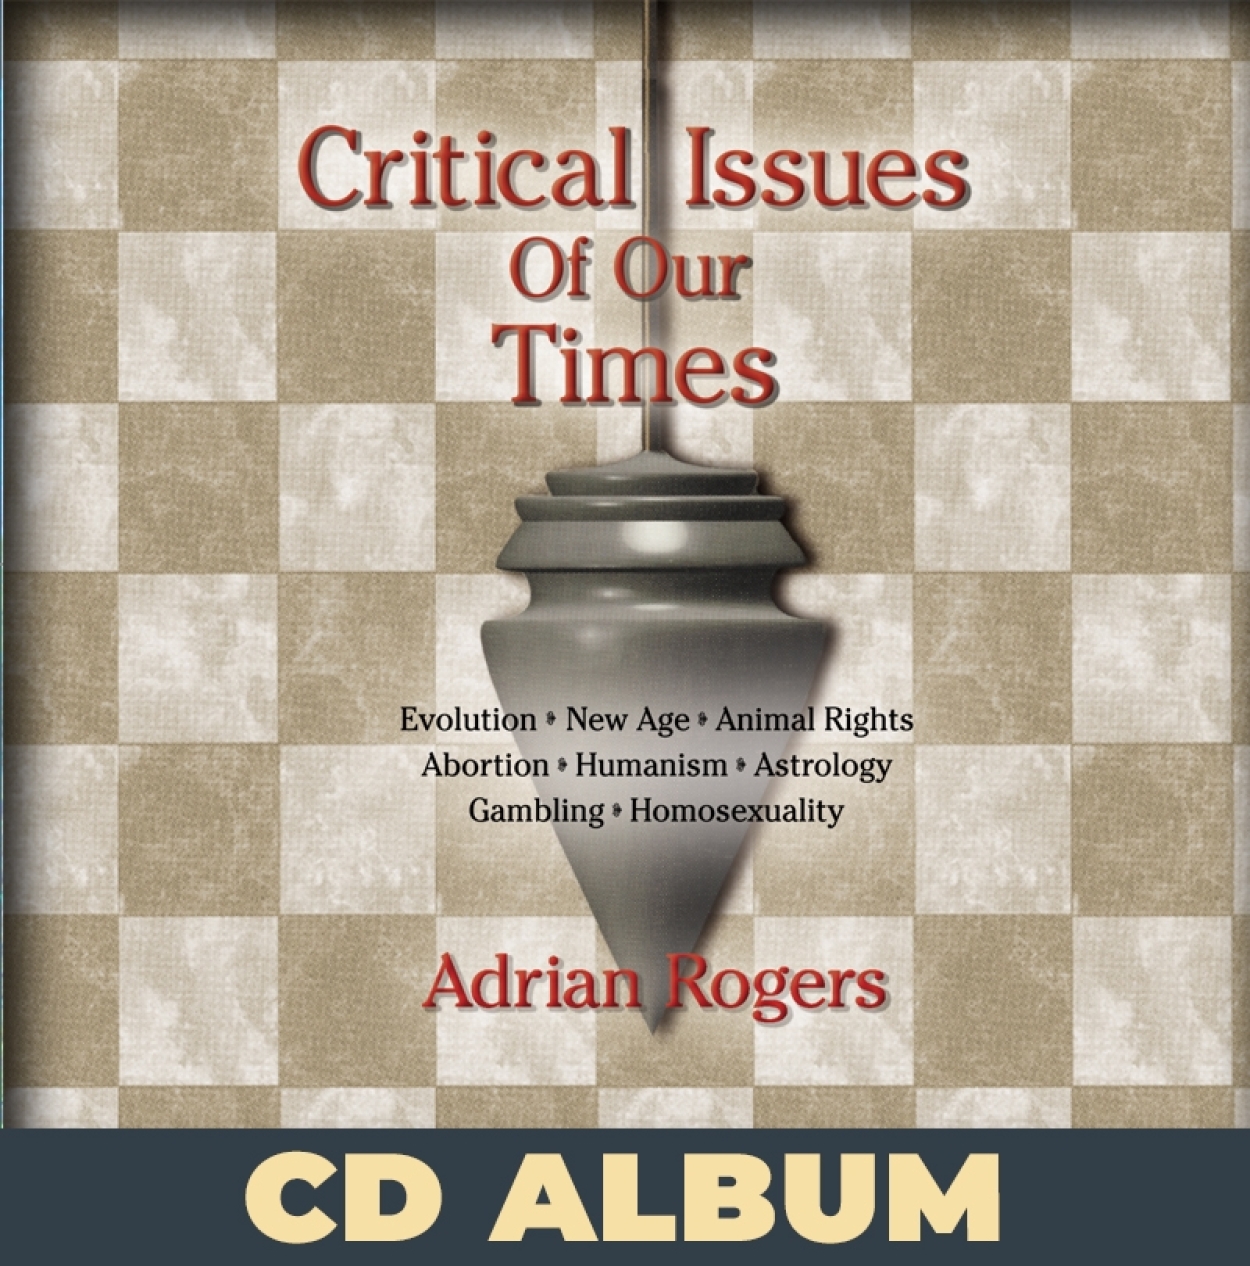 Critical issues of our times cd album cda149